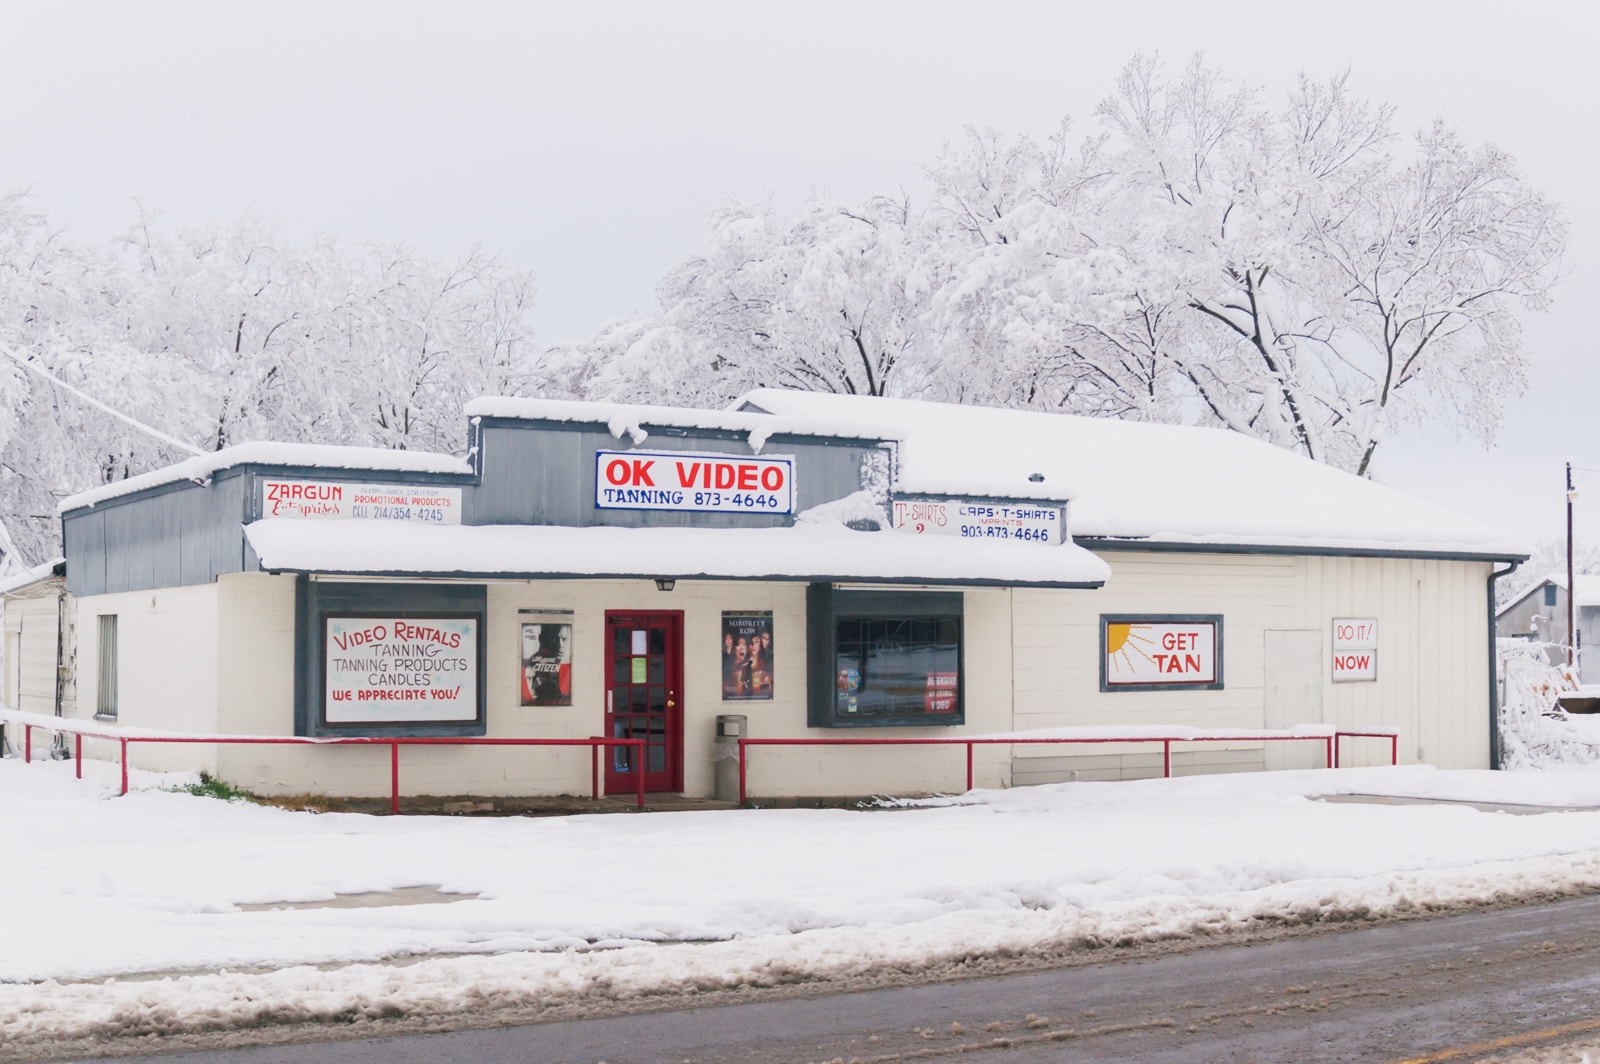 OK Video Store in the 2010 East Texas snowstorm